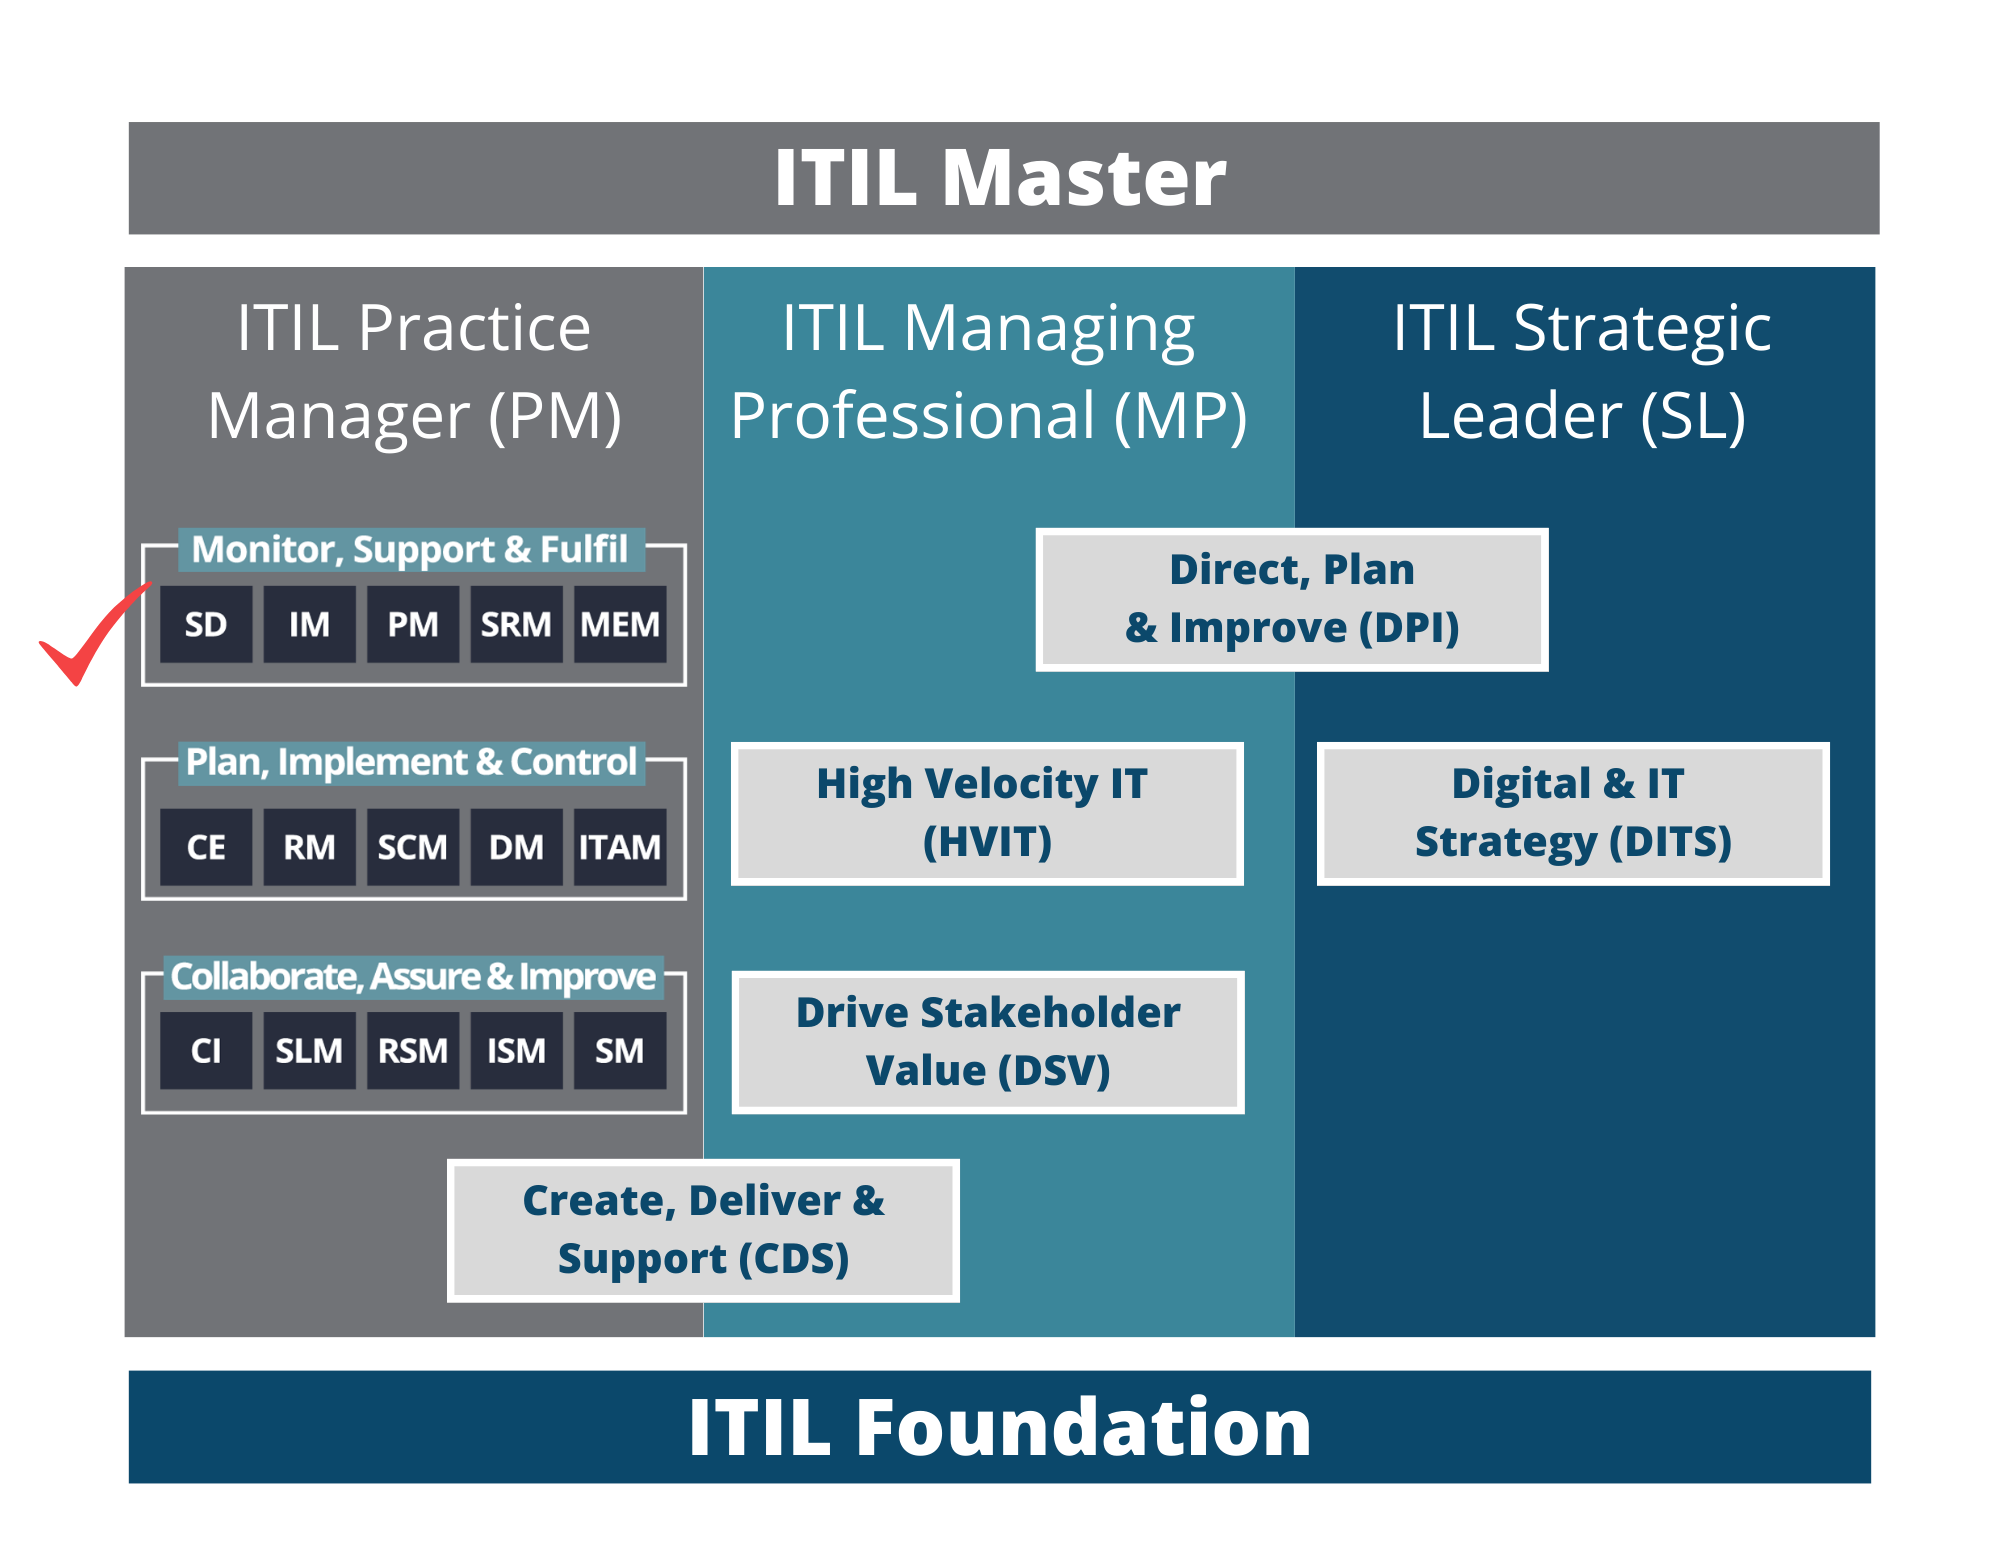 ITIL Monitor, Support & Fulfil